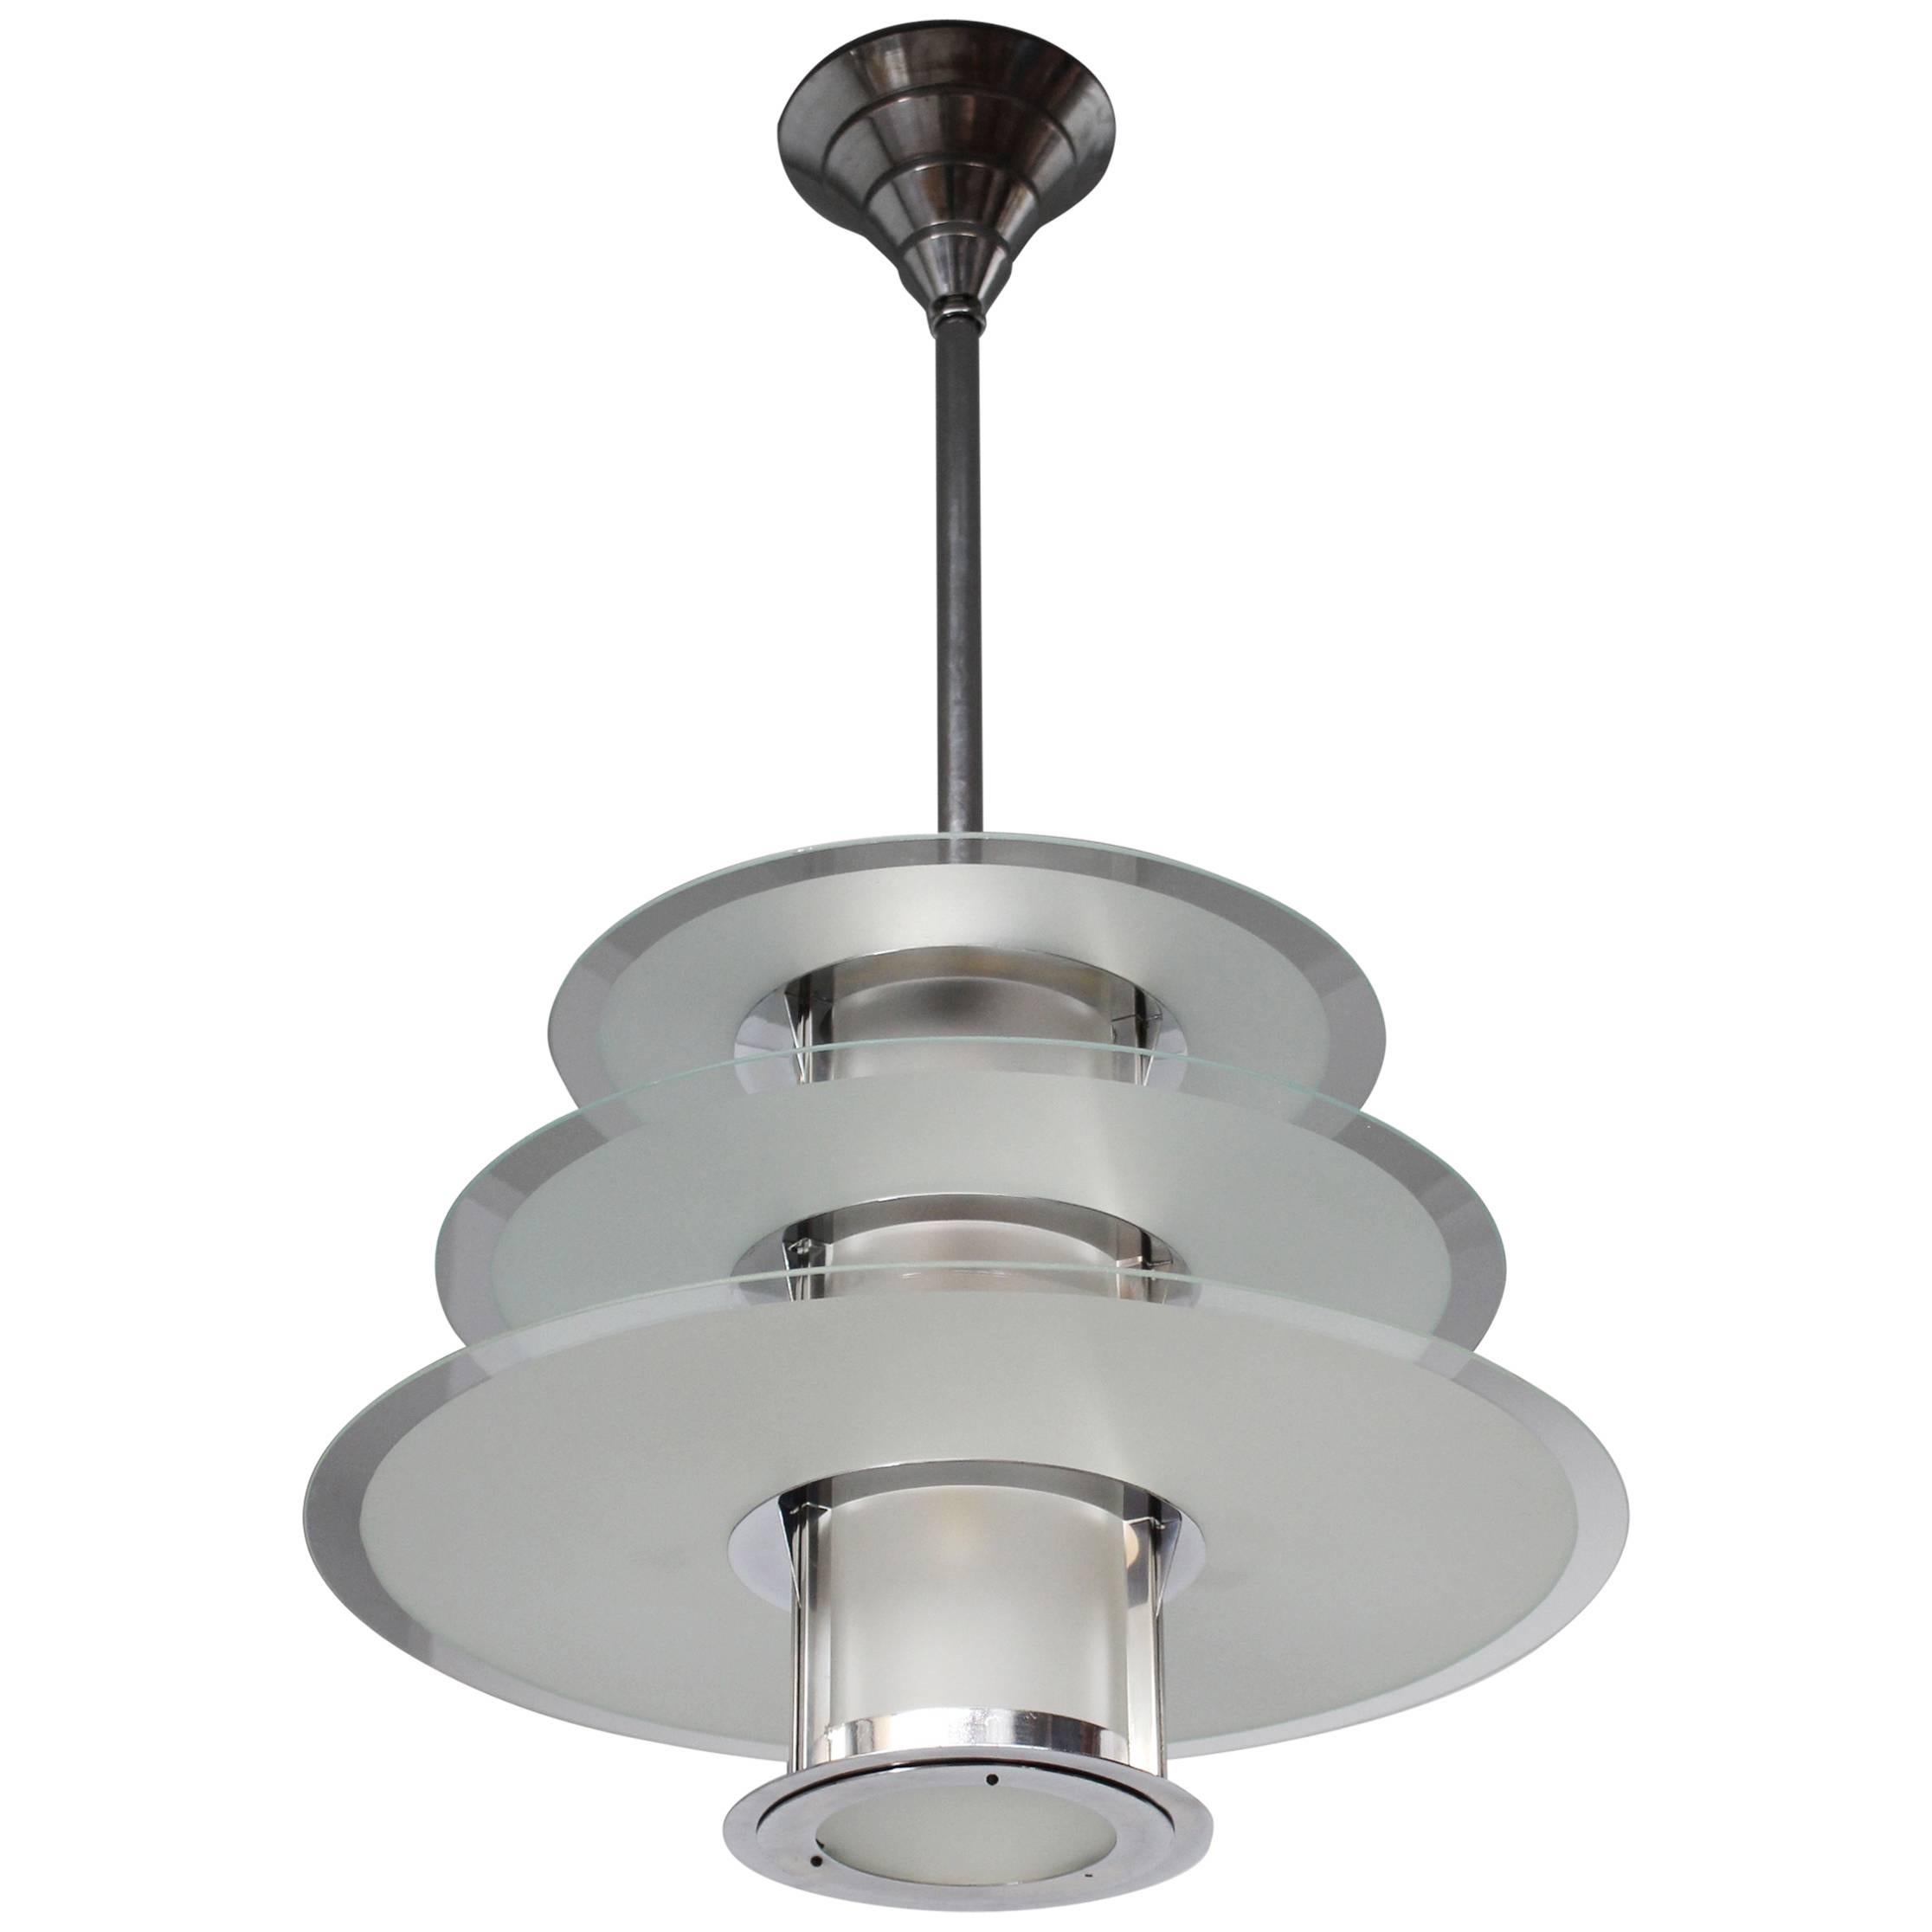 A Fine French 1930's Chrome and Glass Modernist Chandelier by Genet et Michon